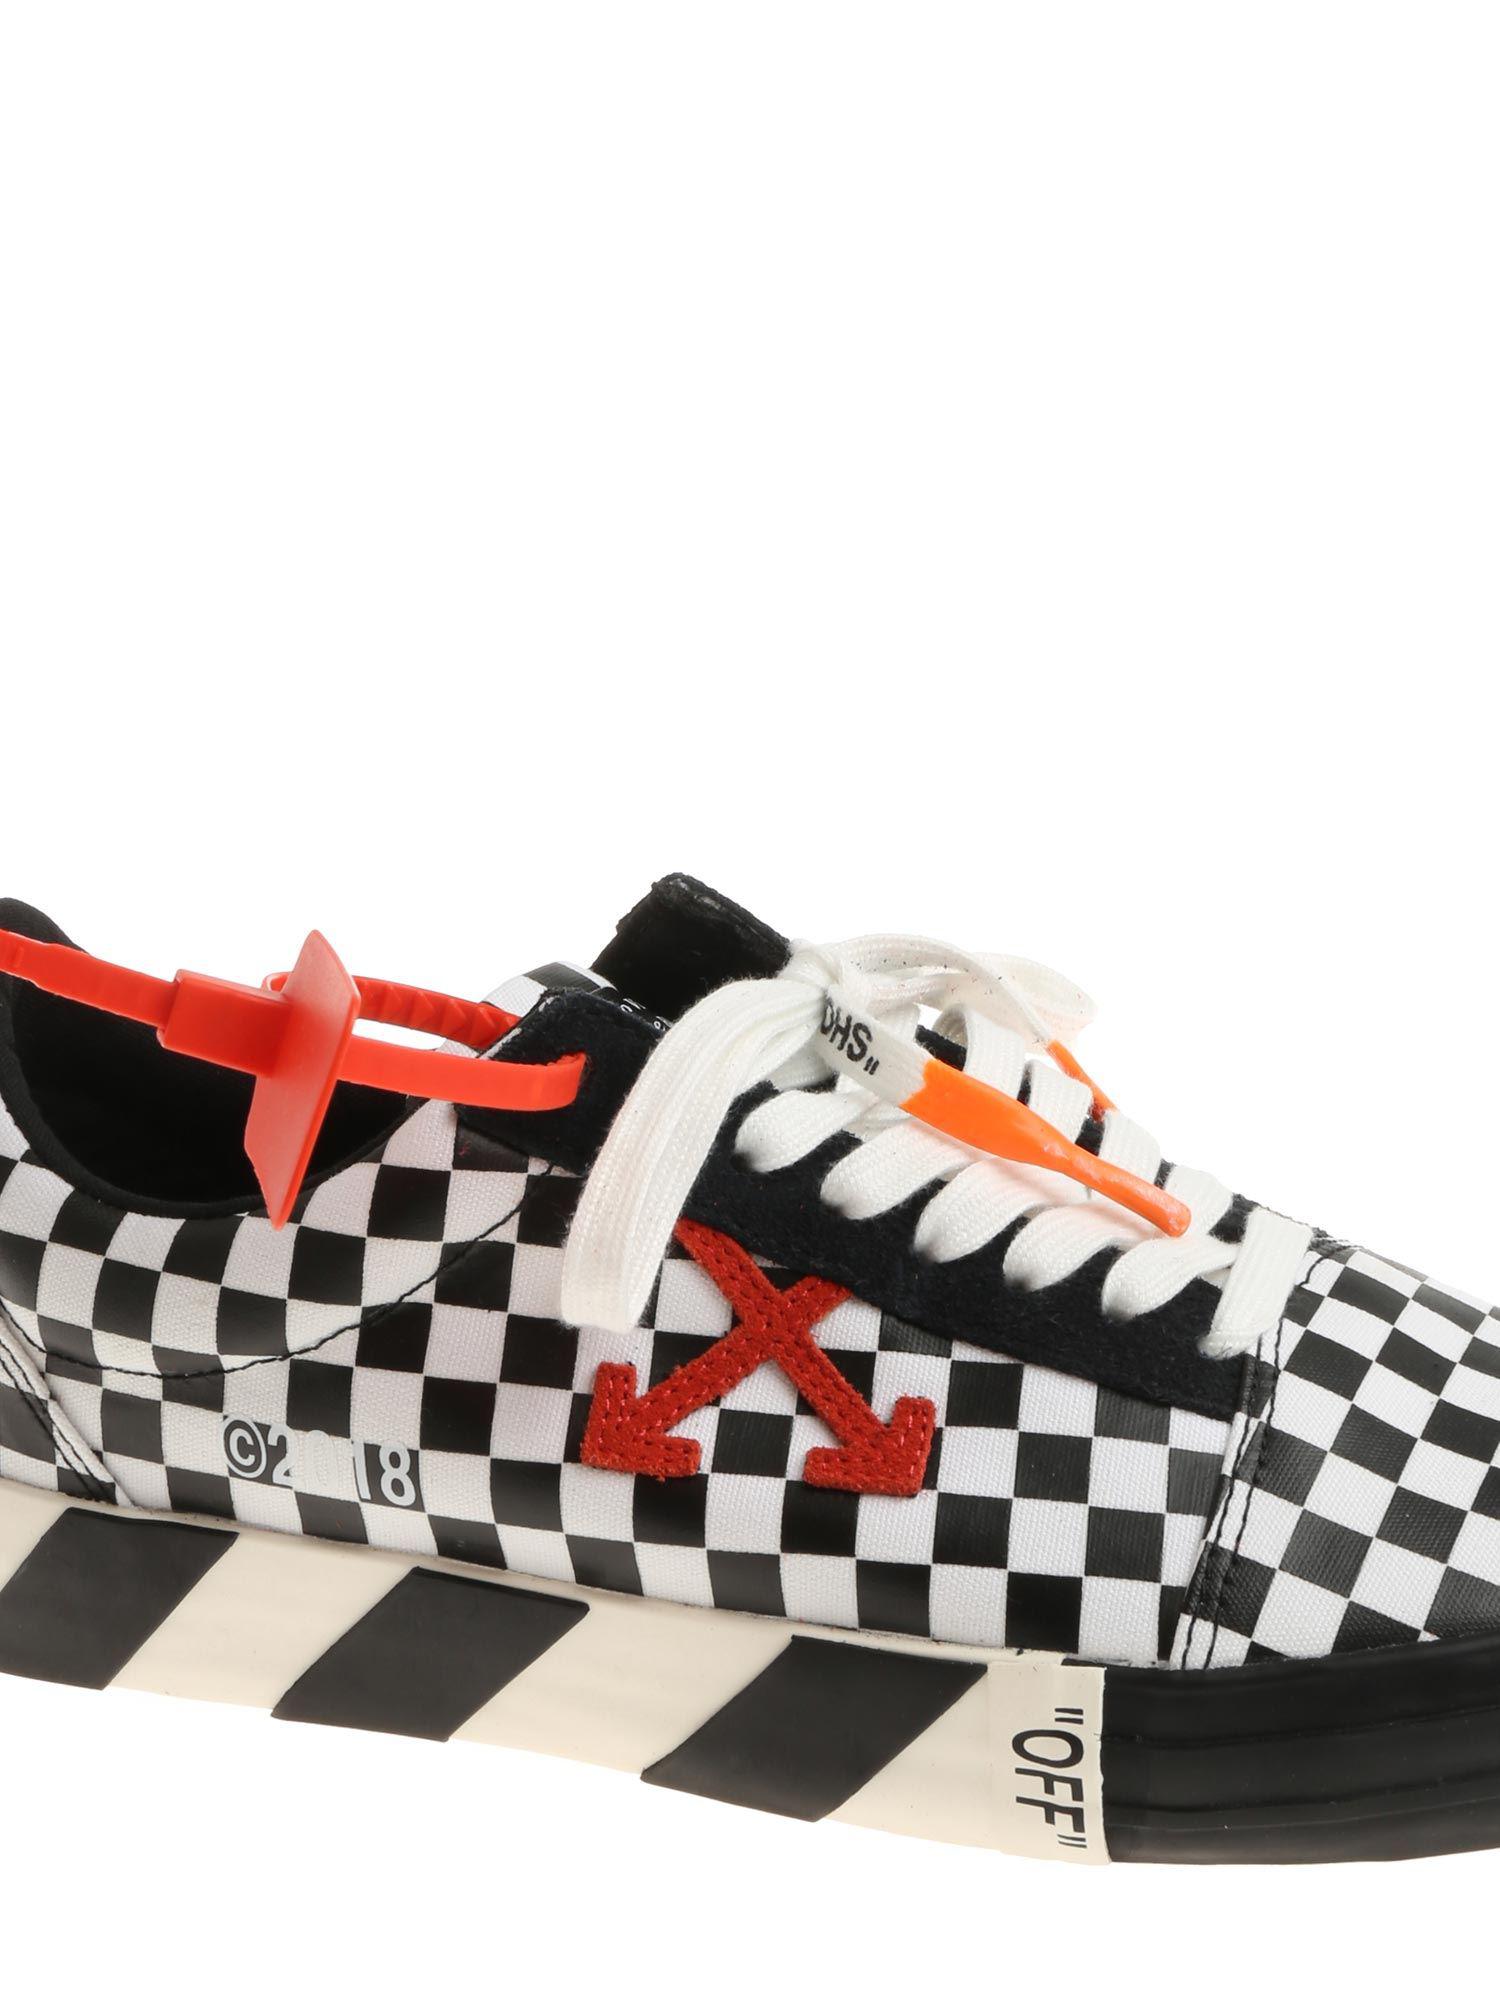 off white checkered shoes